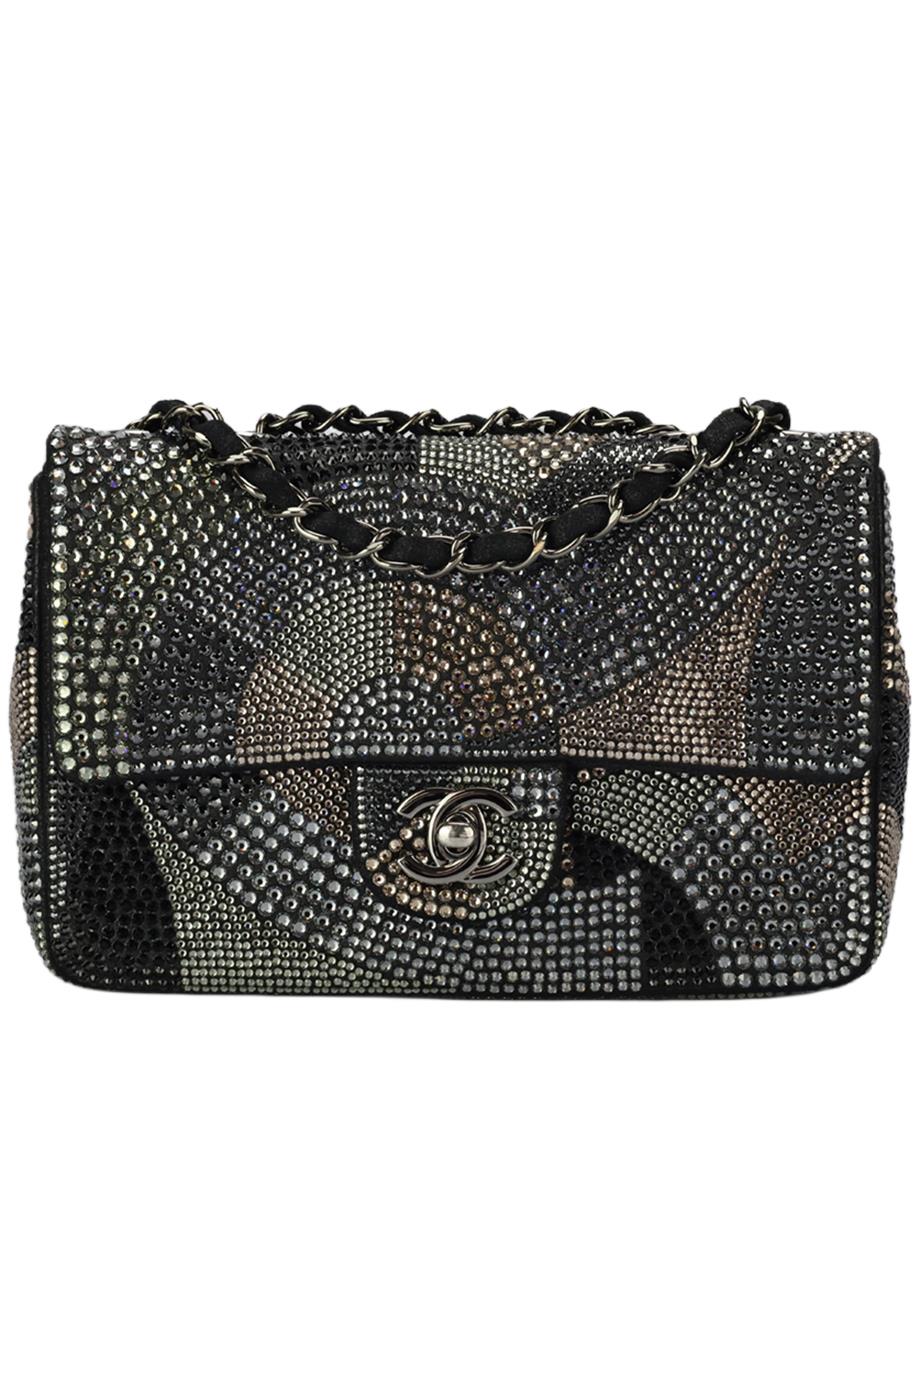 CHANEL 2015 CLASSIC MINI RECTANGLE FLAP STRASS EMBELLISHED